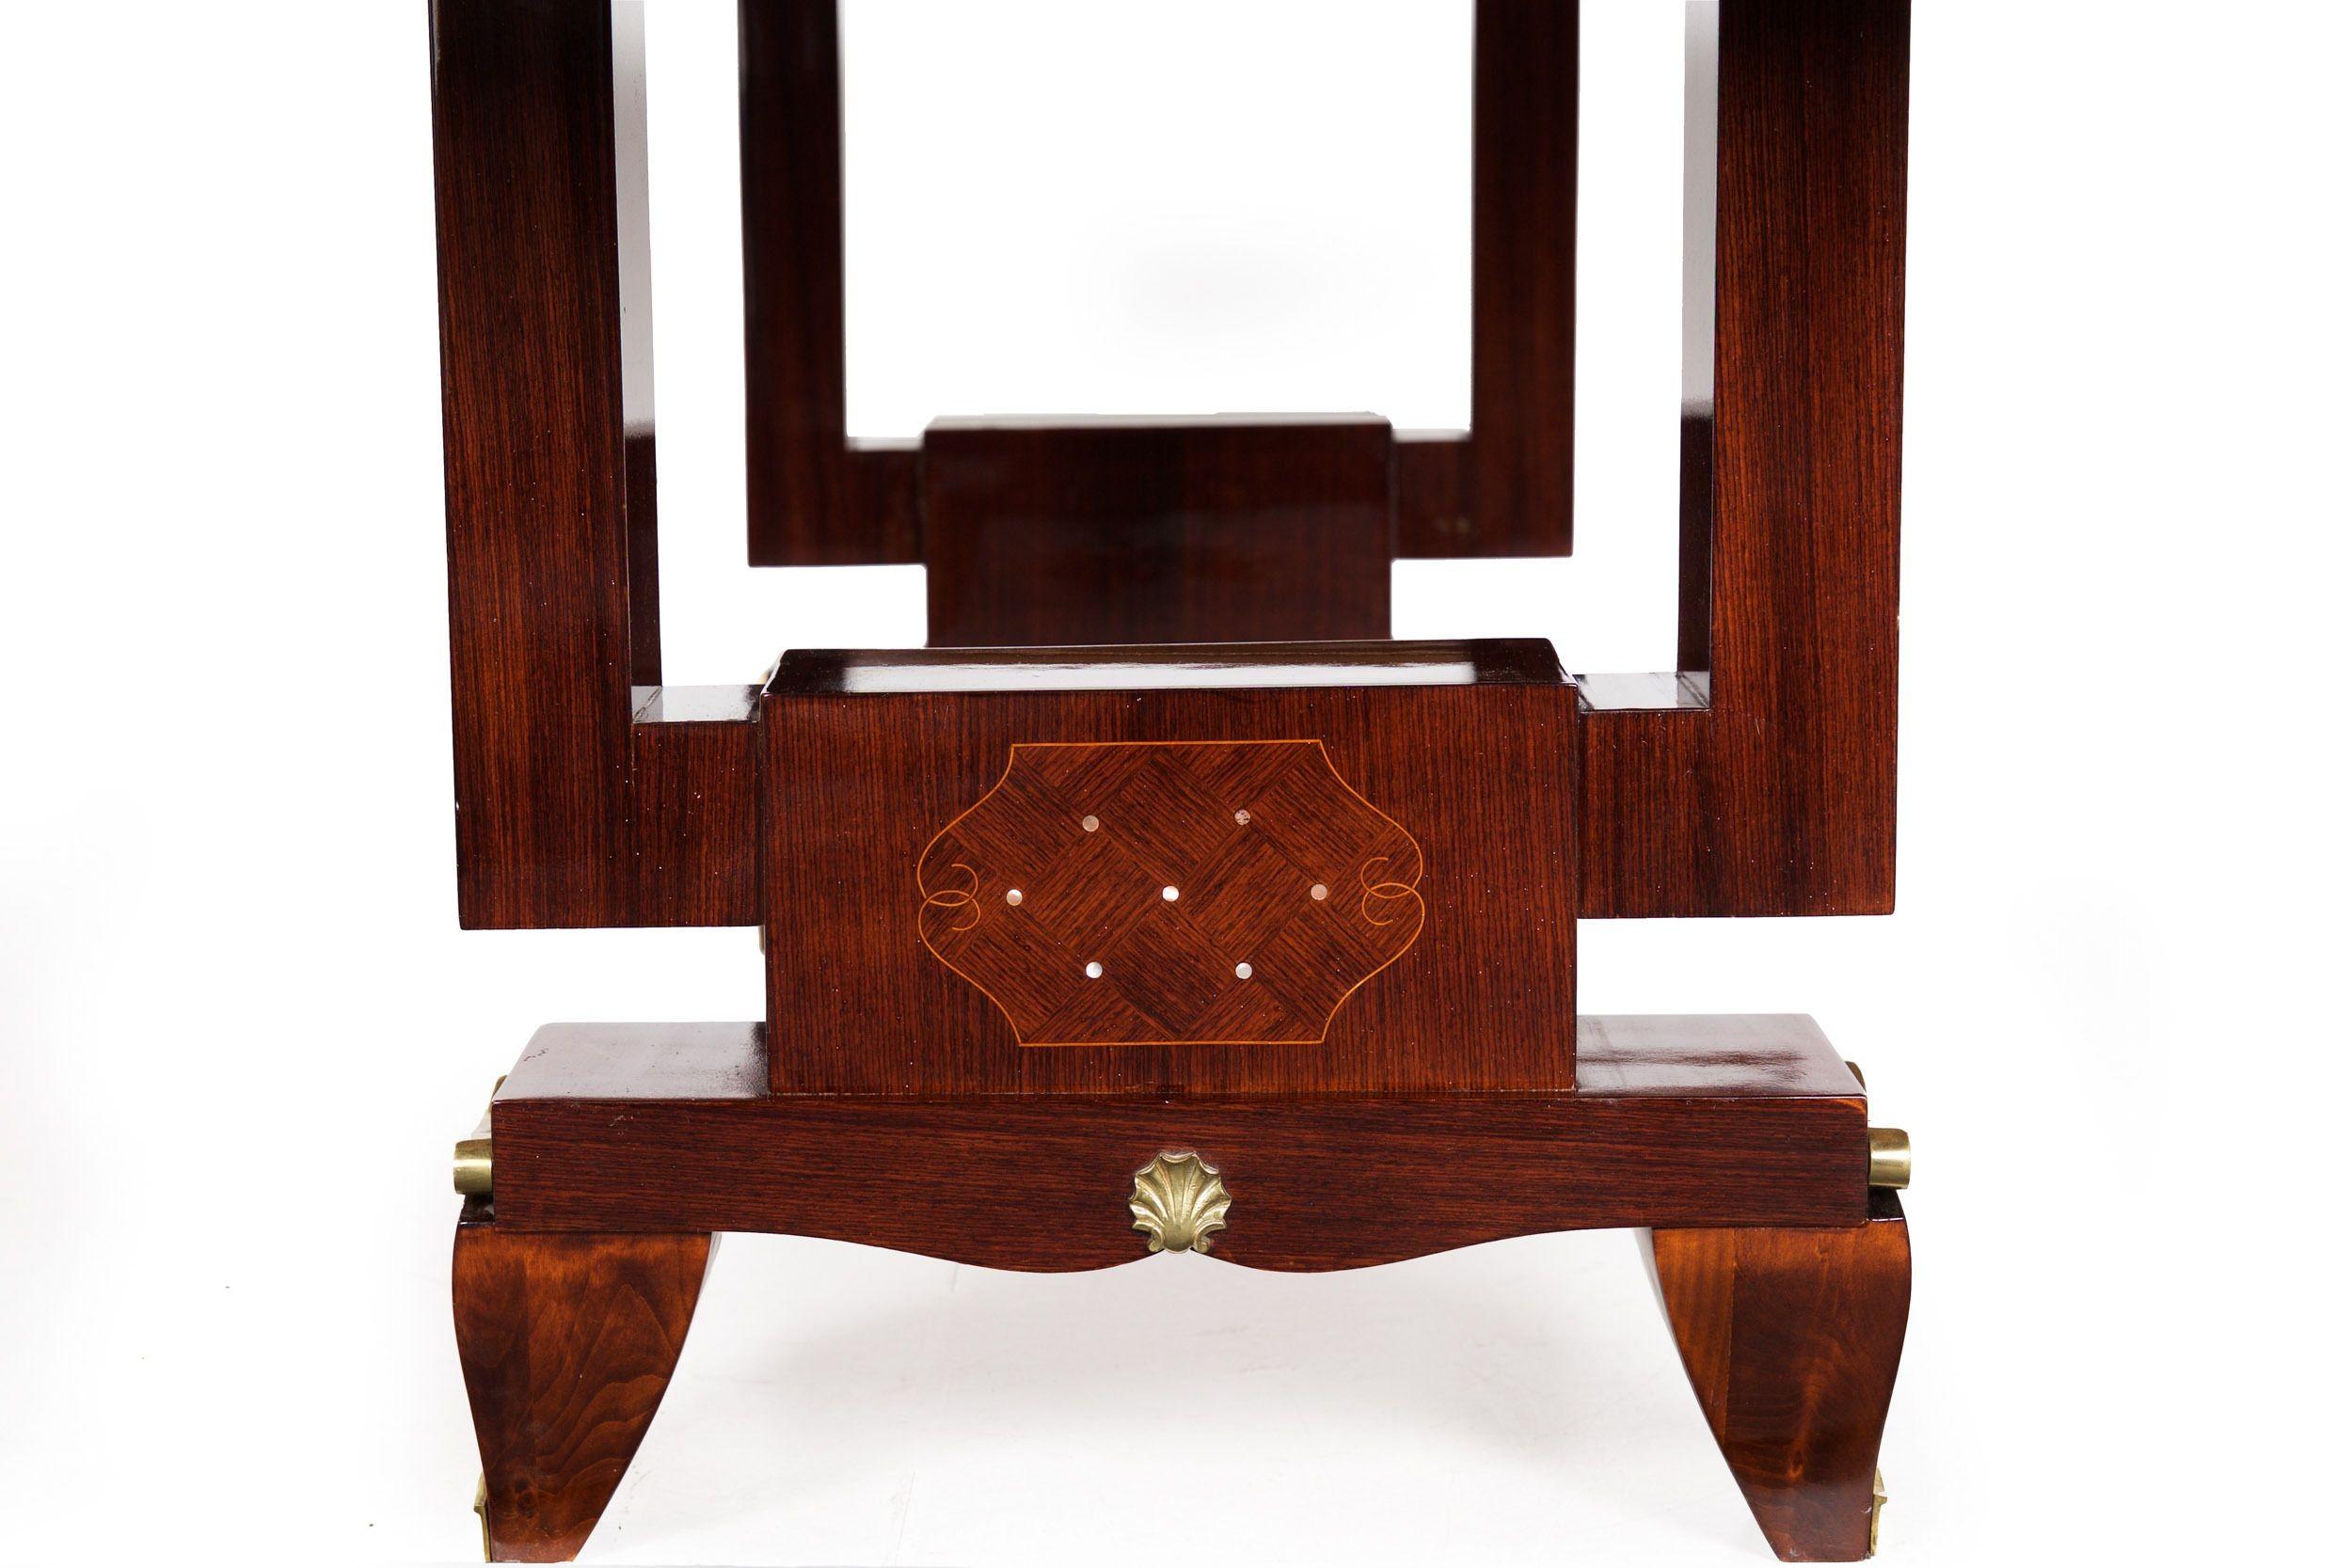 French Art Deco Inlaid Mother-of-Pearl Rosewood Dining Table, circa 1940s For Sale 5